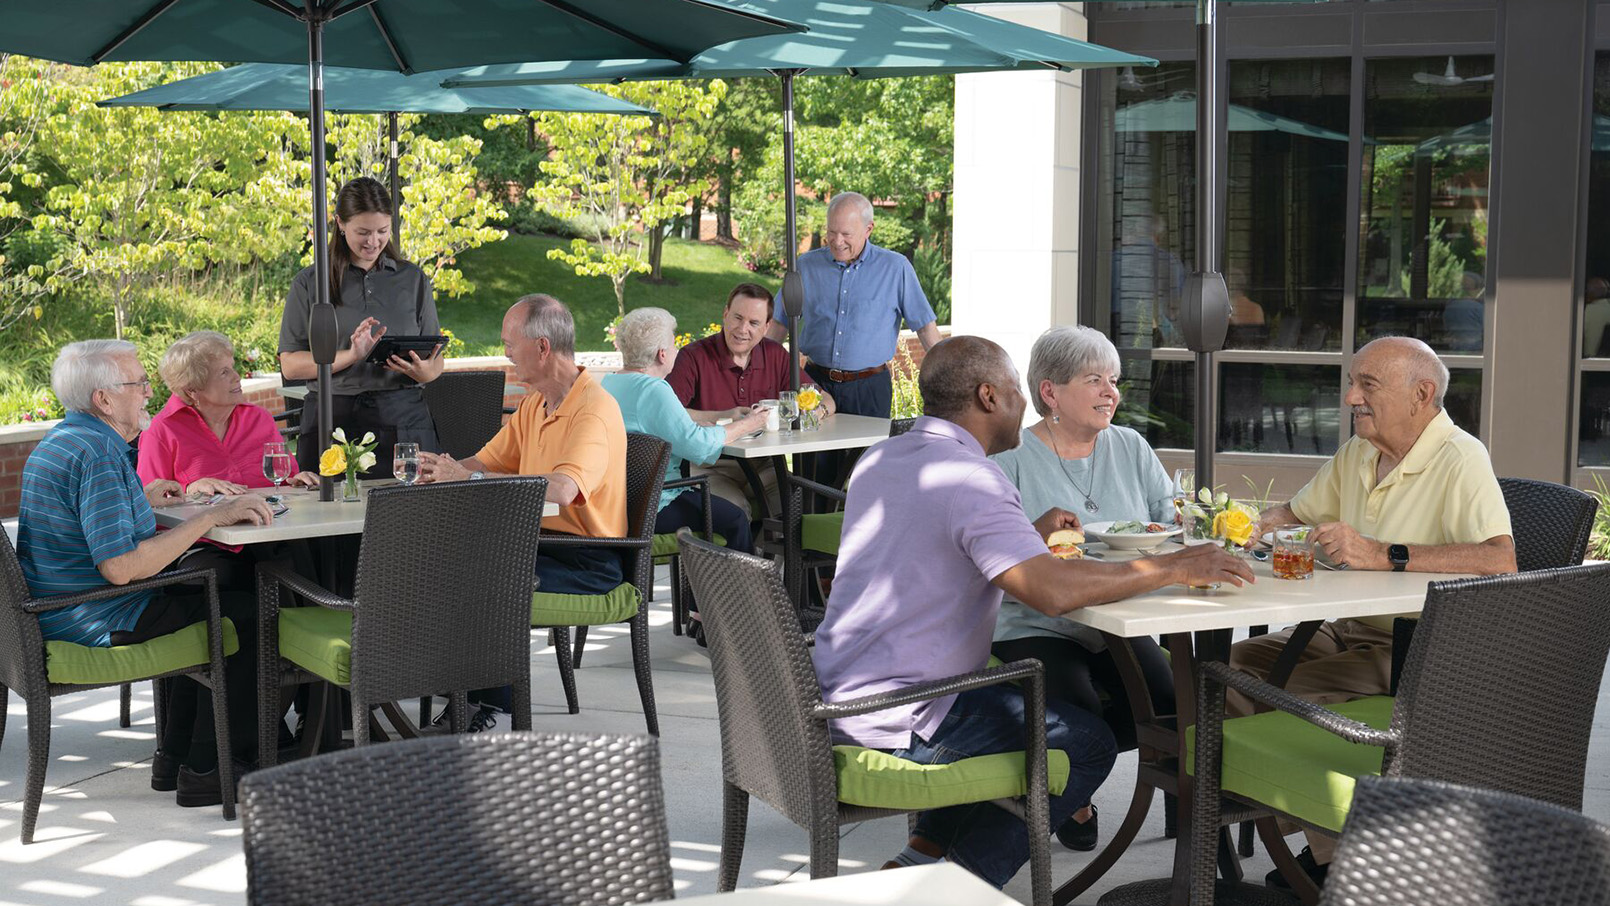 Residents savoring a meal together in the fresh air of our senior living community's outdoor dining area.